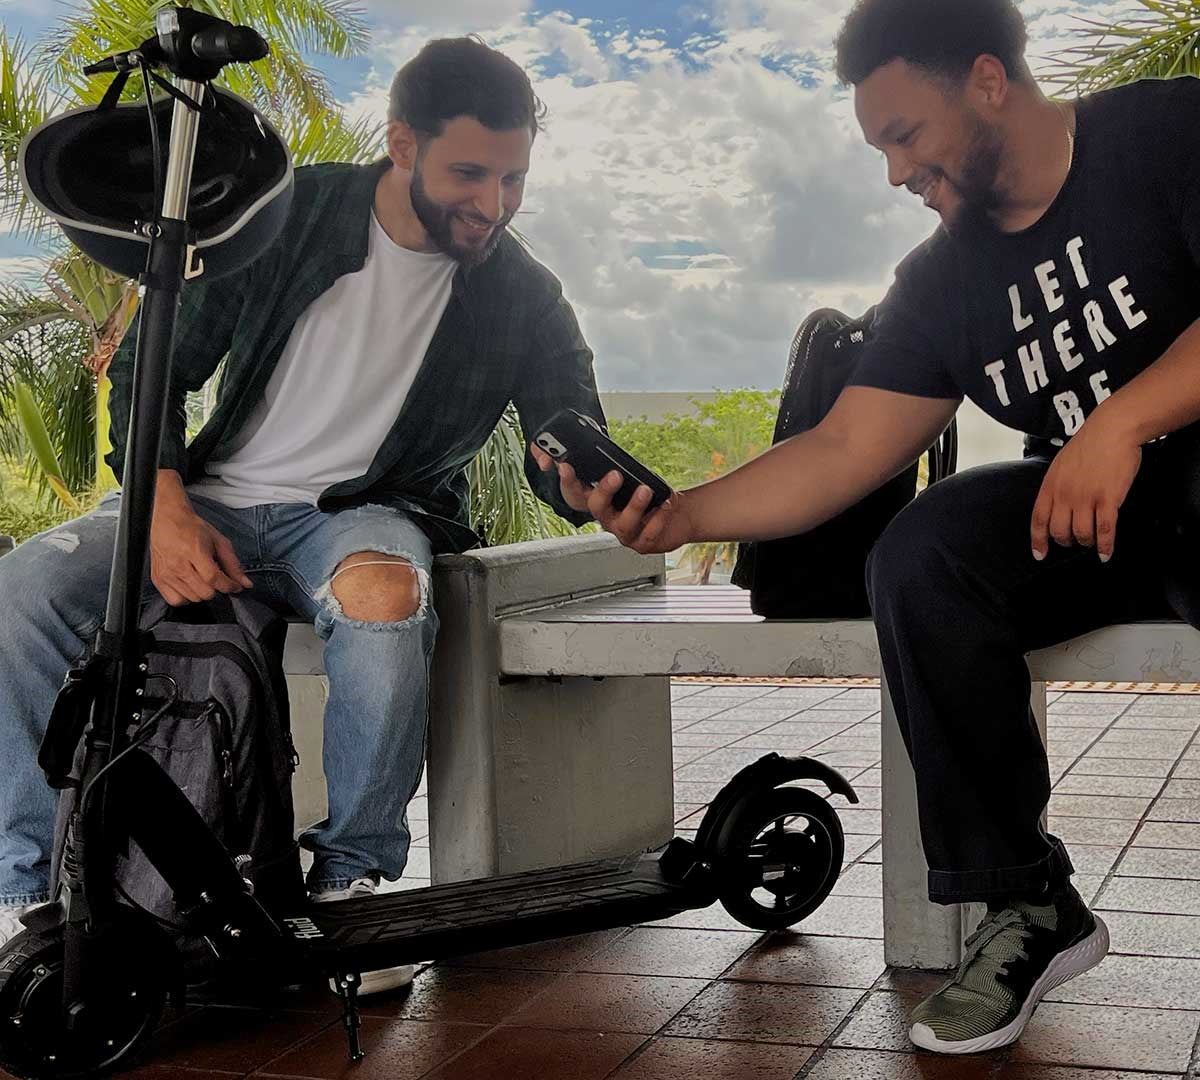 Two friends sharing the latest electric scooter apps while sitting on their scooters, representing a community of electric scooter enthusiasts.